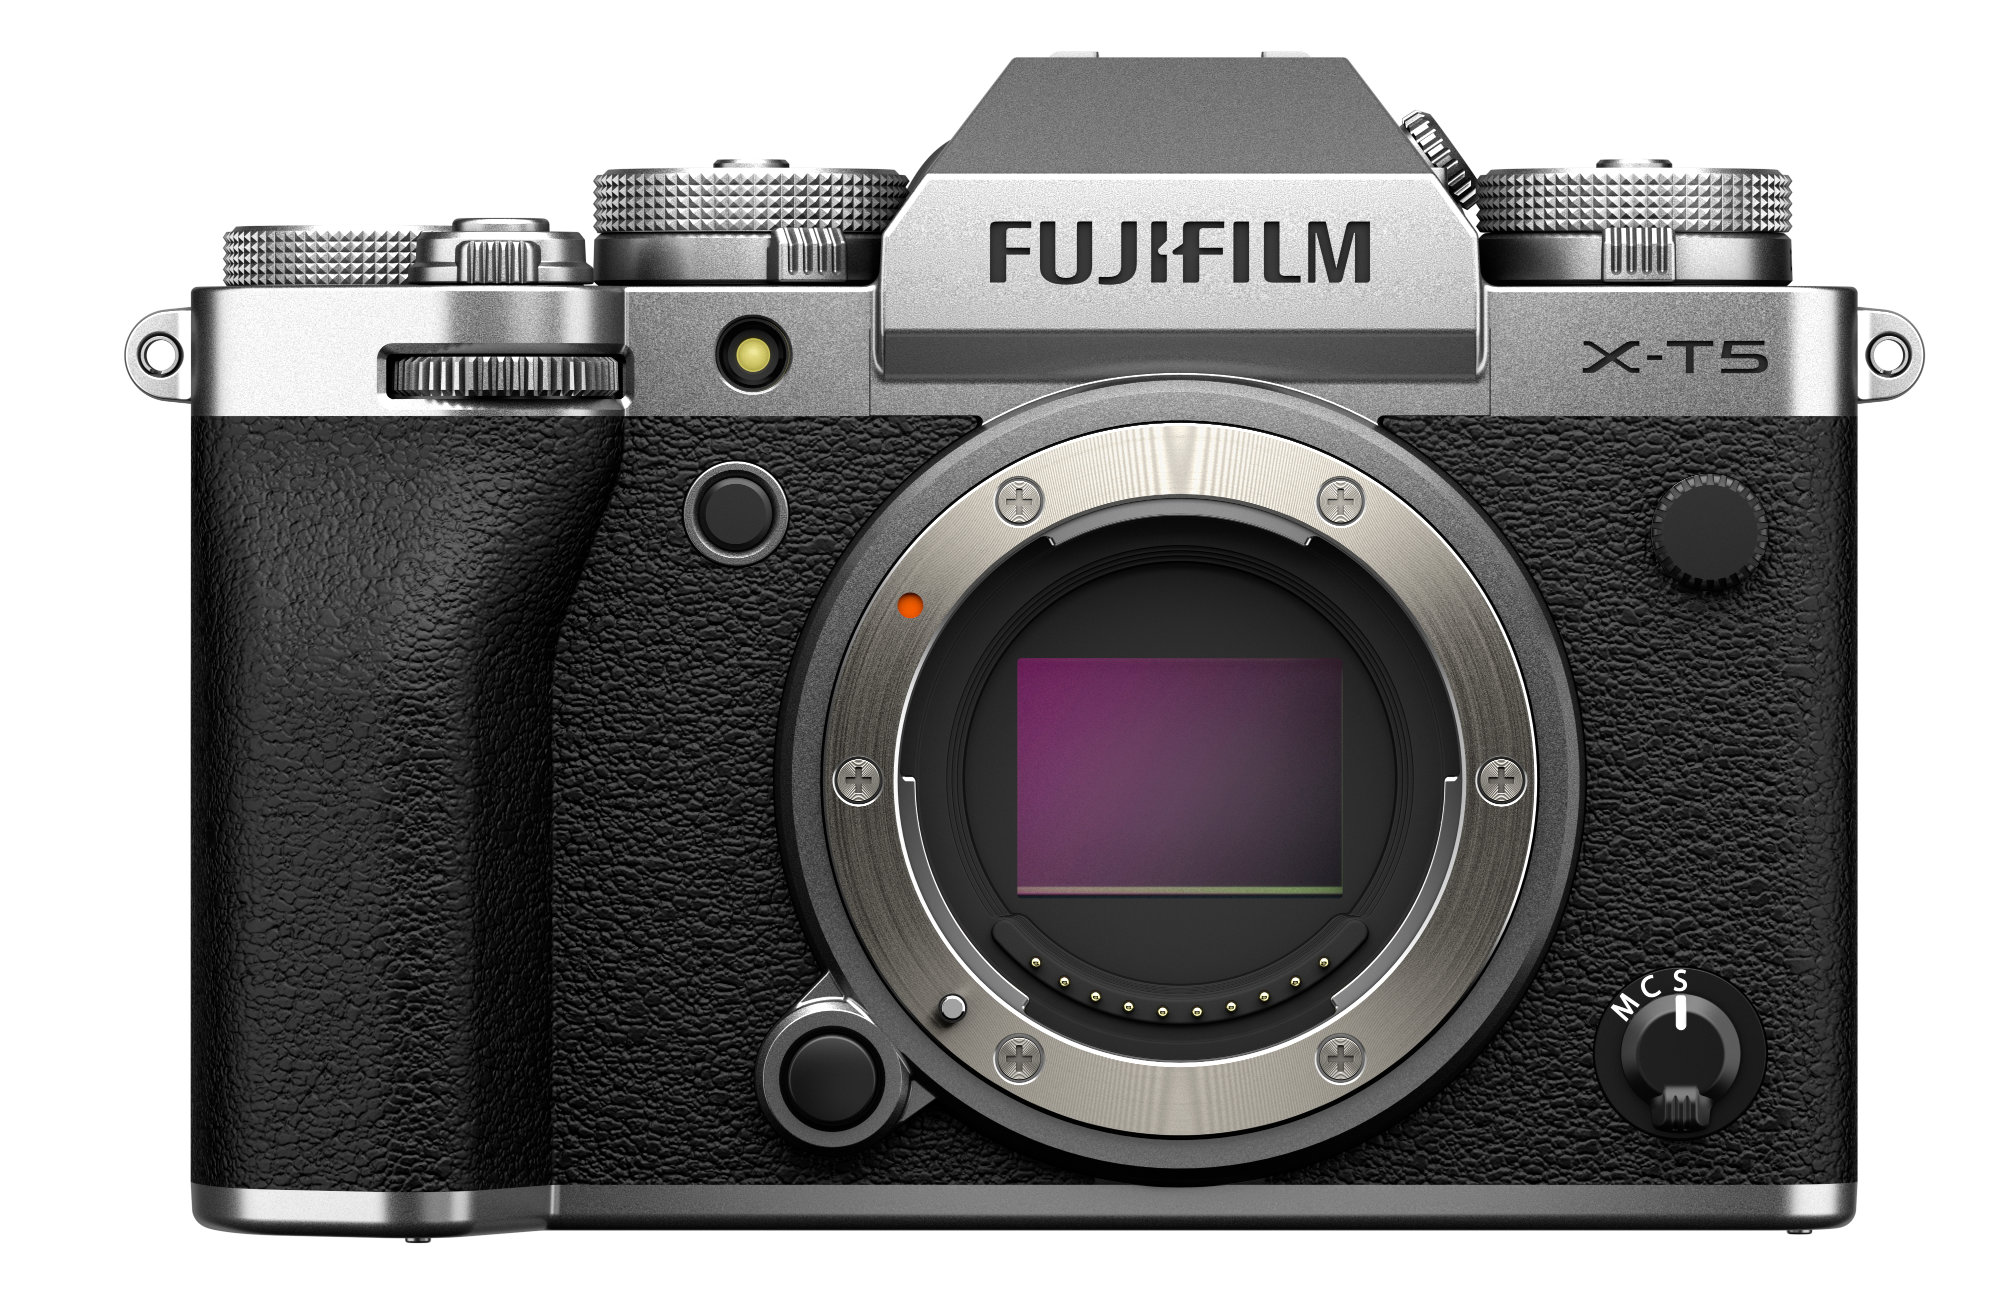 New FUJIFILM X-T5 - More compact than X-Tx predecessor and the X-H2(s) models